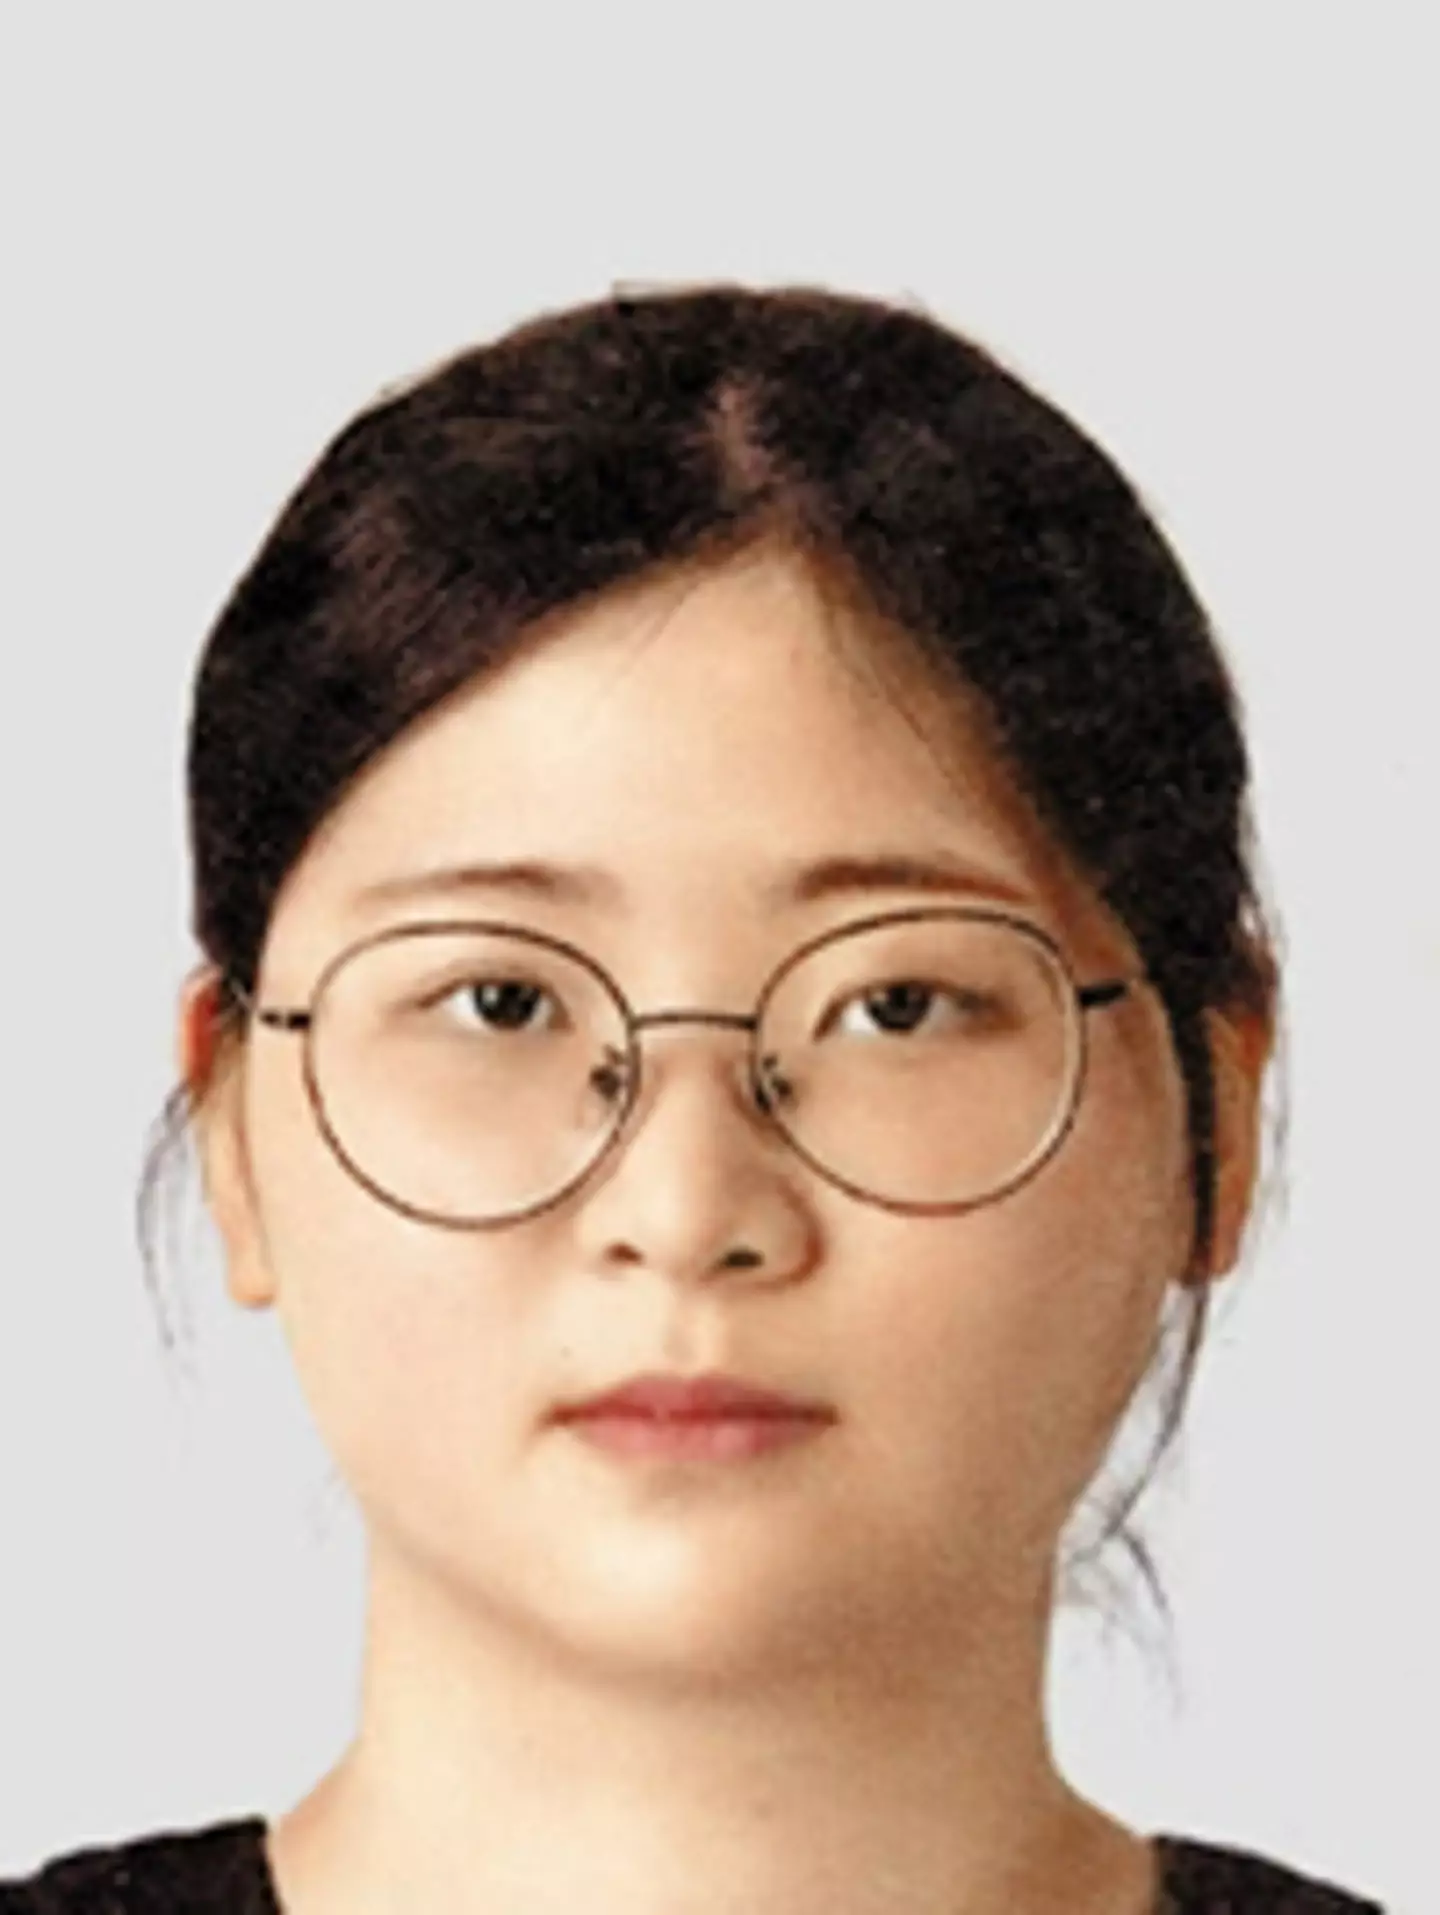 Jung Yoo-jung has been arrested on suspicion of murder.